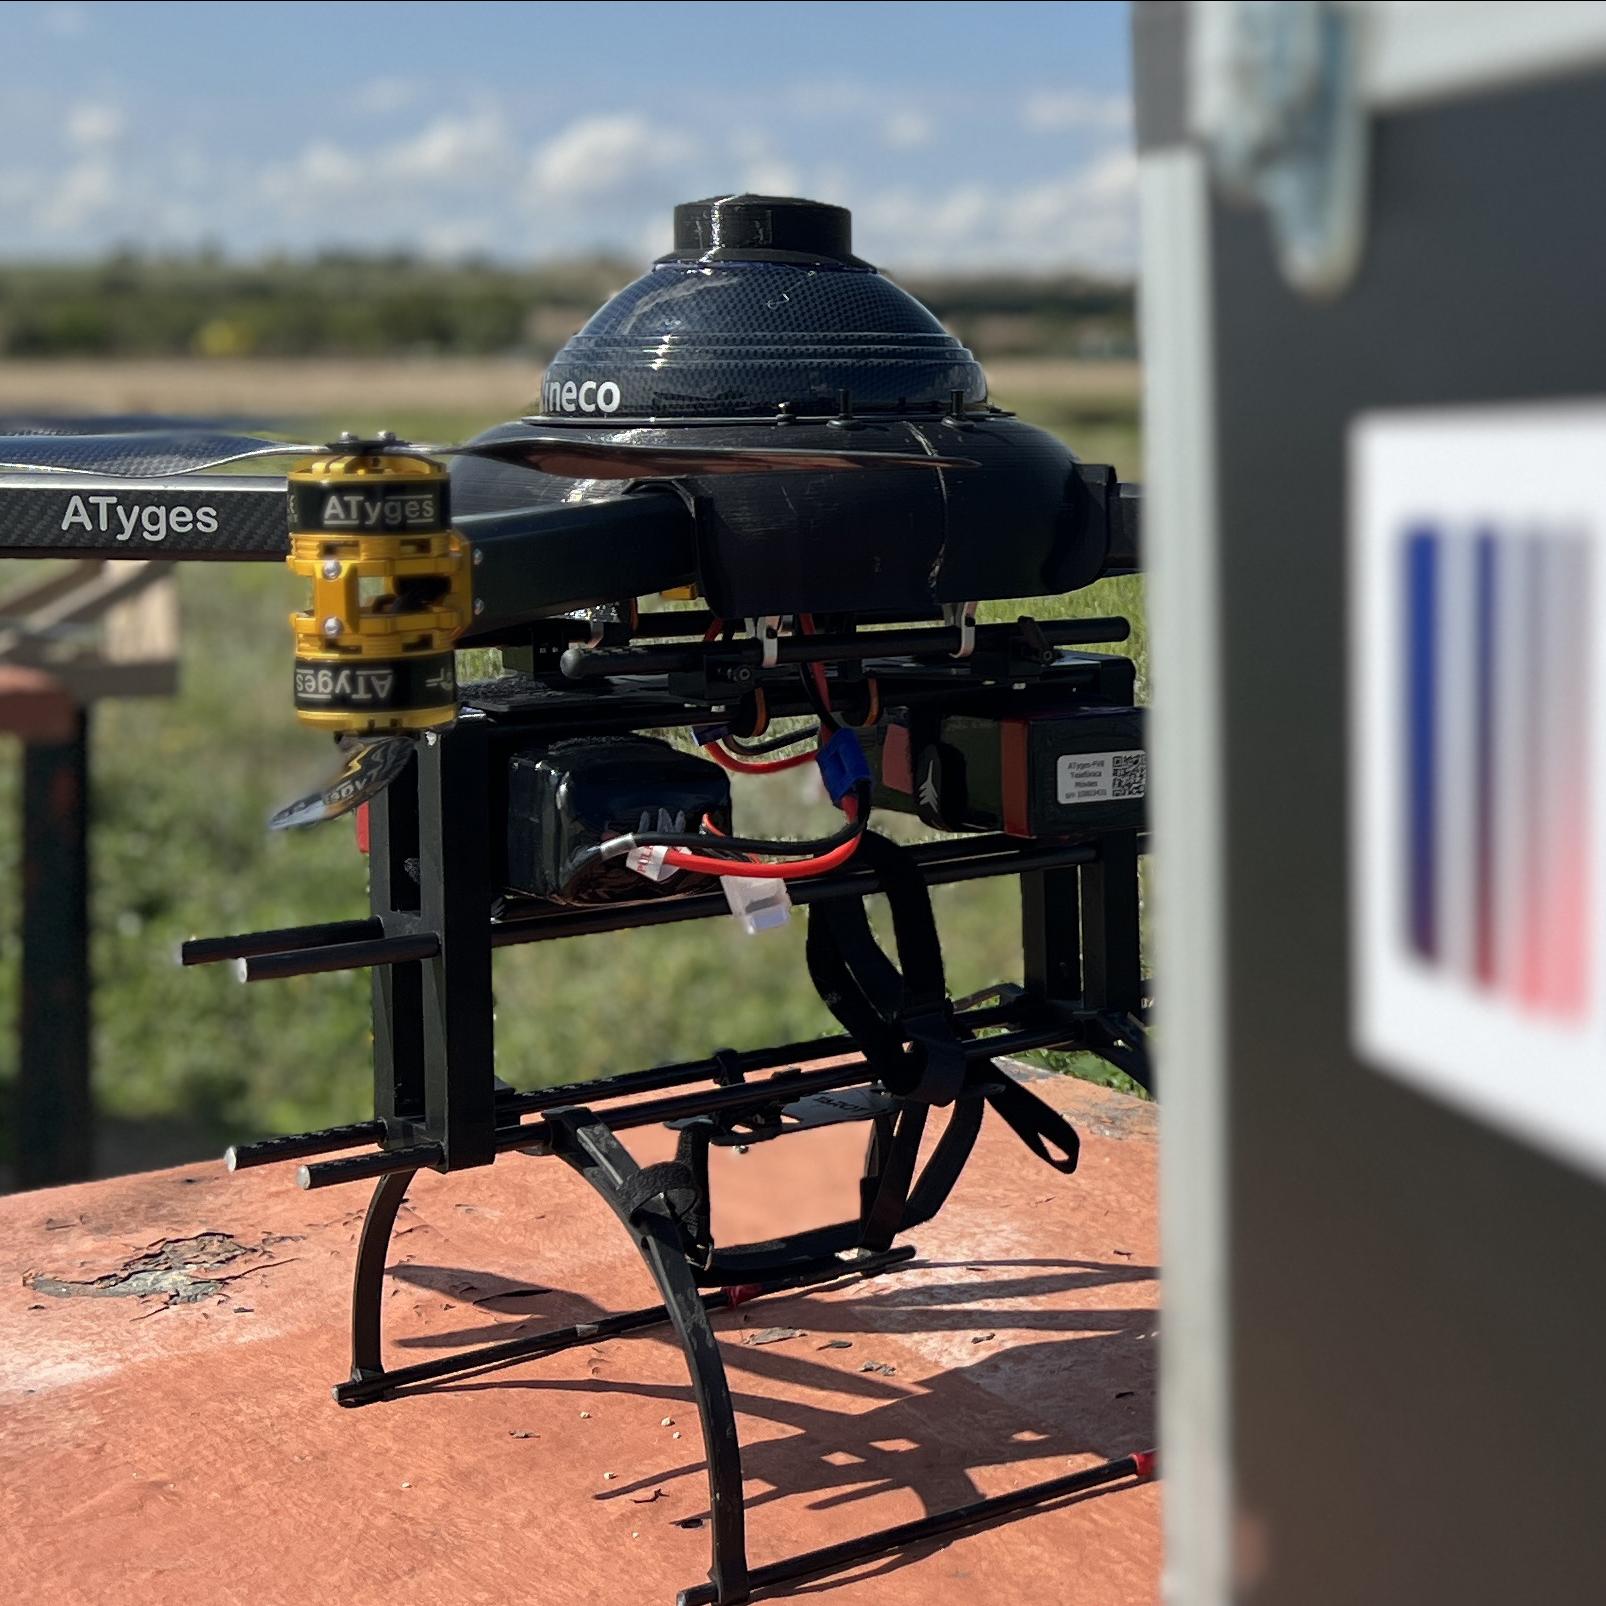 The 8 selected projects allow the company to prepare to design, among other ideas, a pioneering system of drones in nests that can be operated remotely to check the quality of infrastructure. 